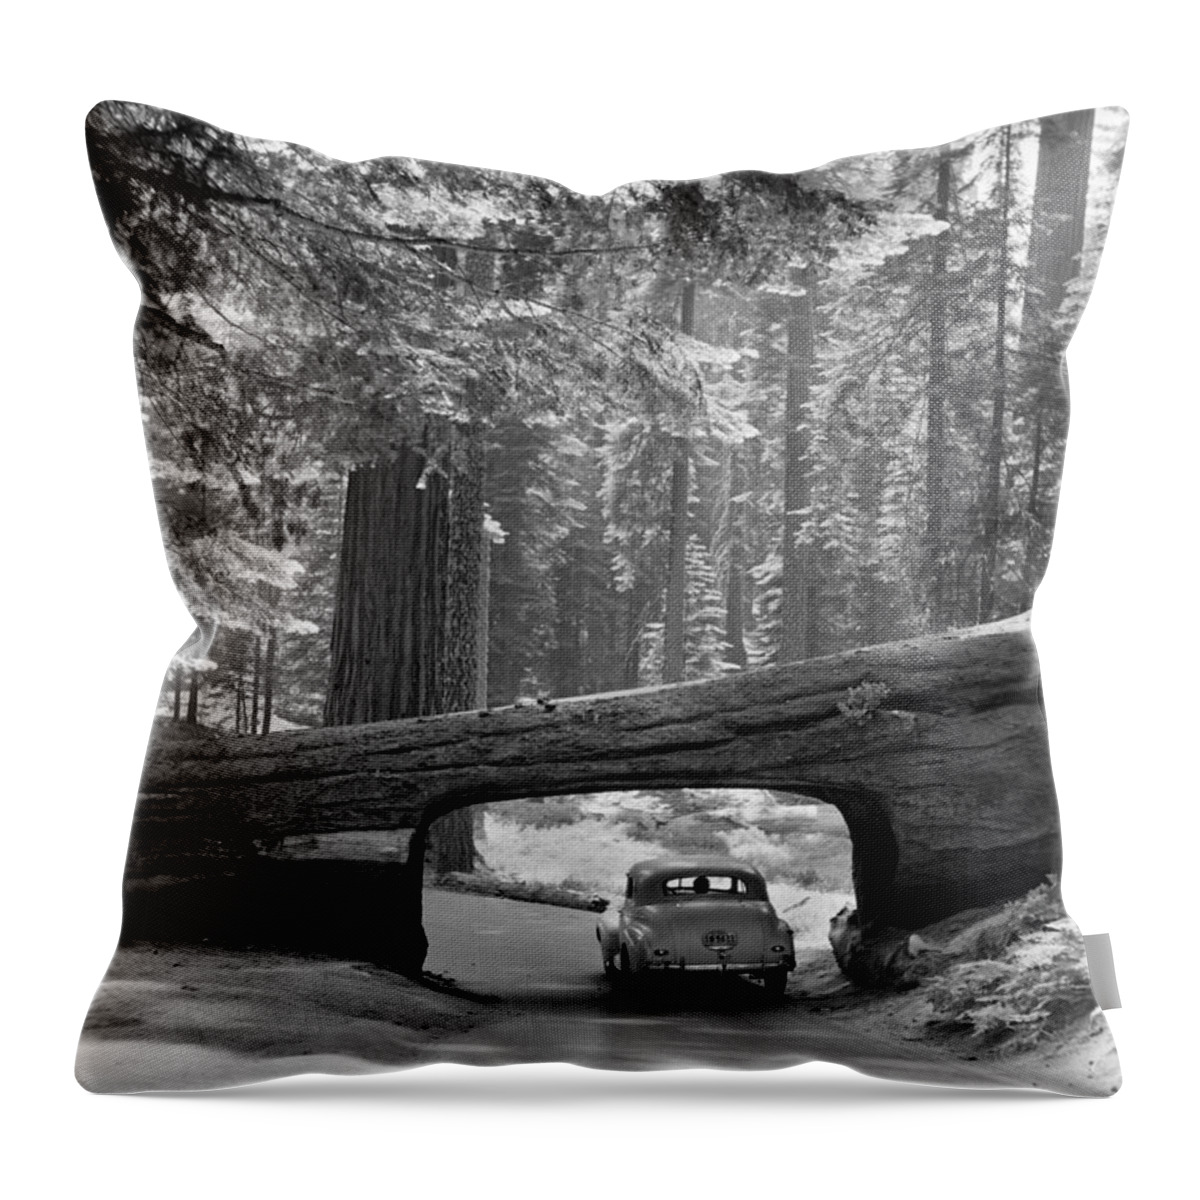 1957 Throw Pillow featuring the photograph Sequoia National Park by Granger